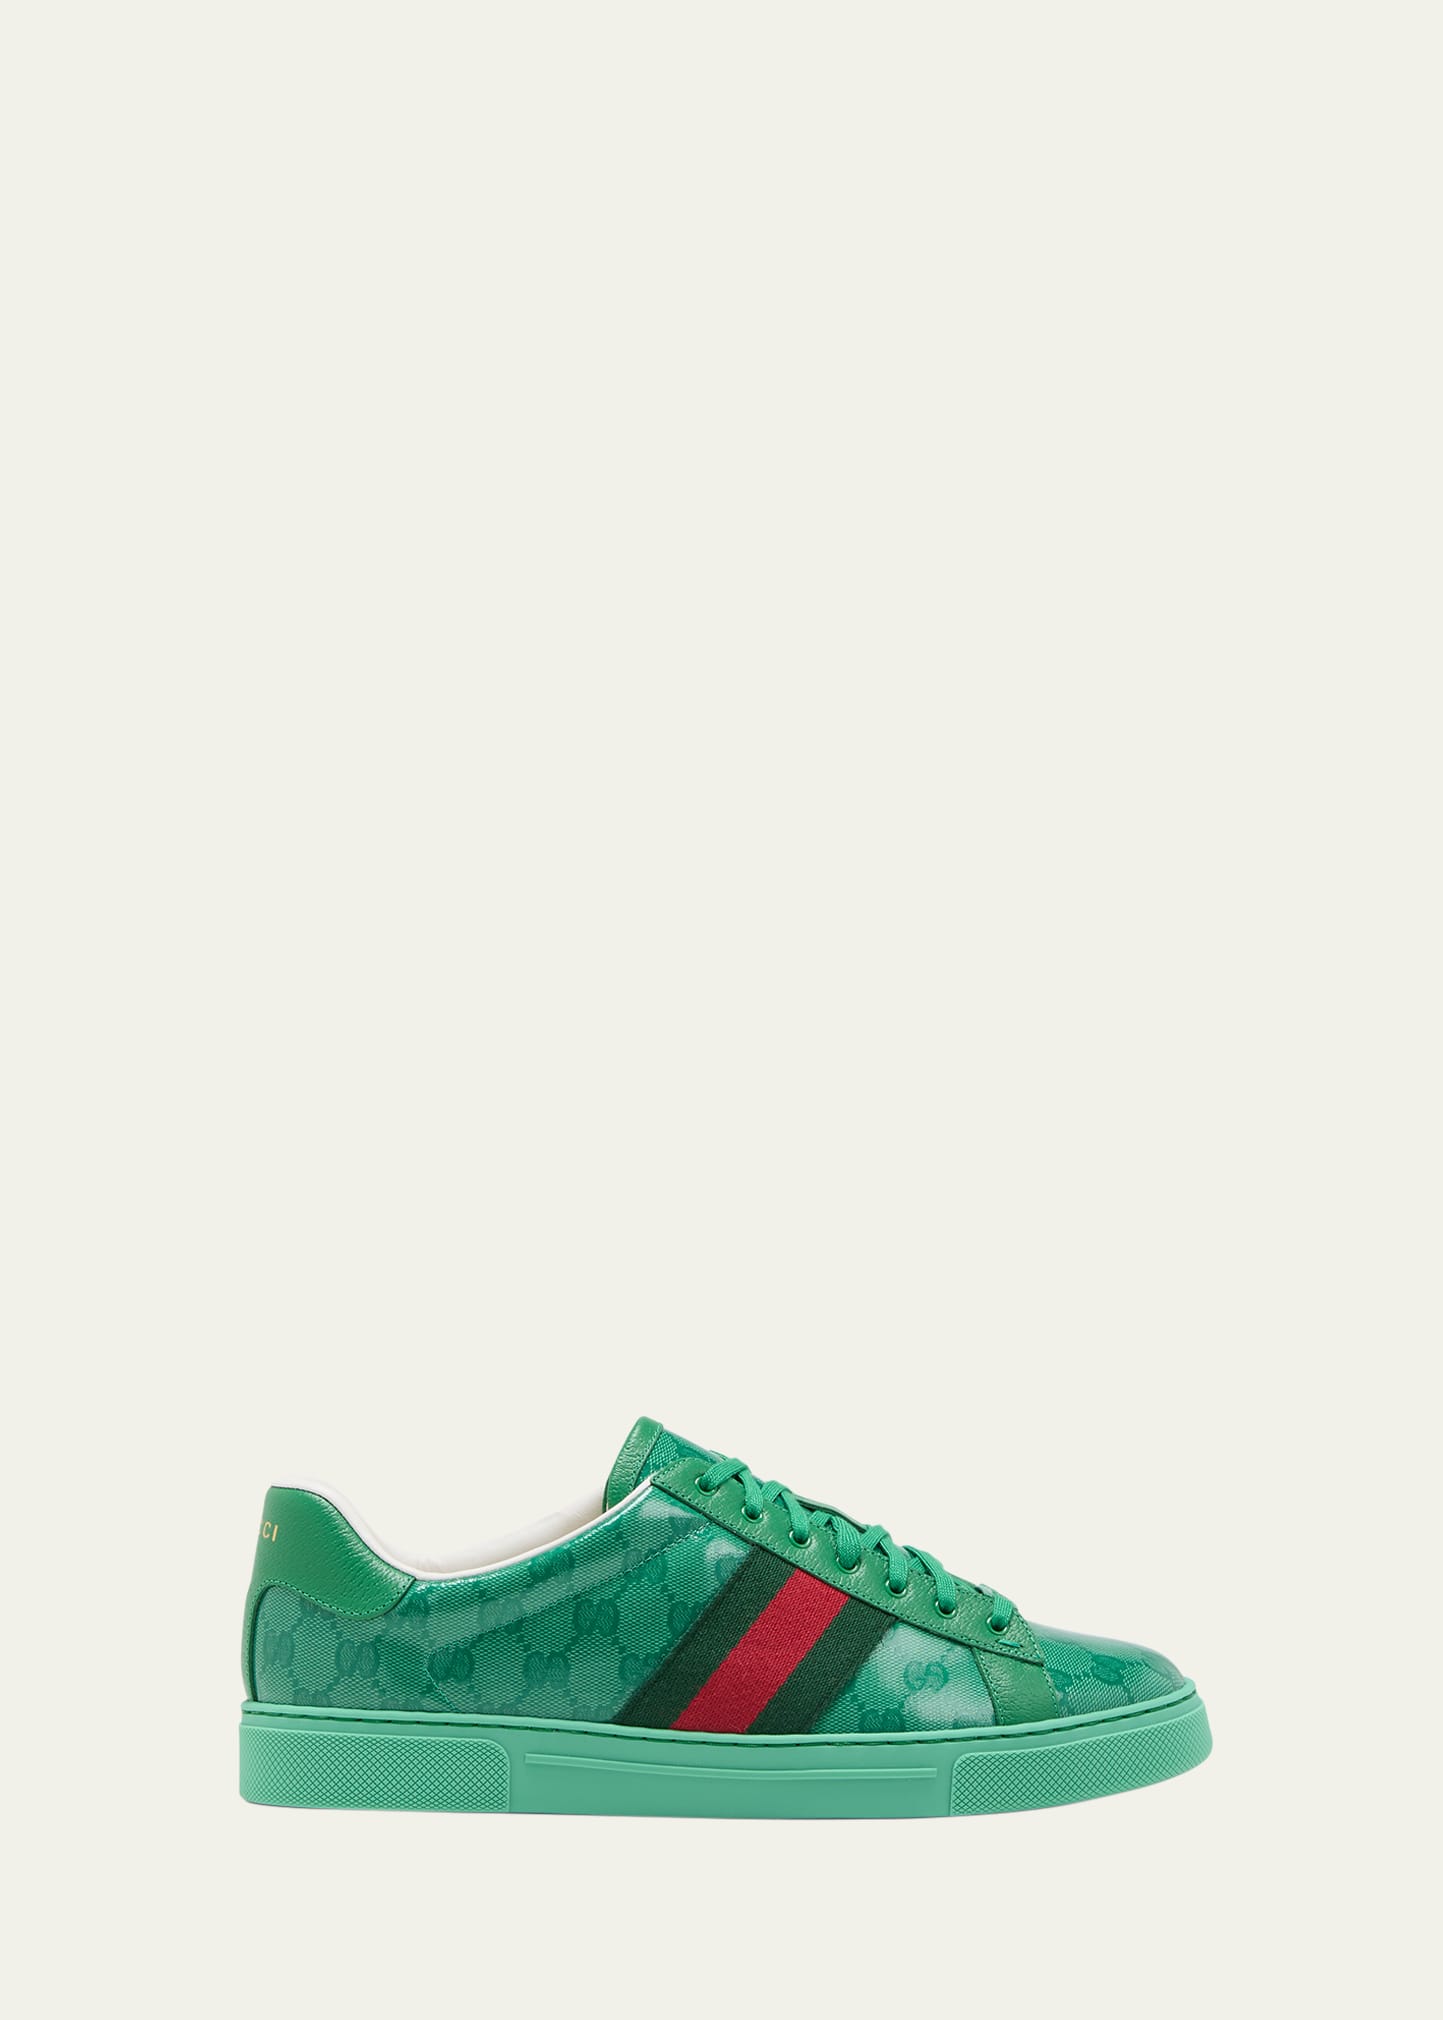 Gucci Men's Ace GG Crystal Canvas Sneakers